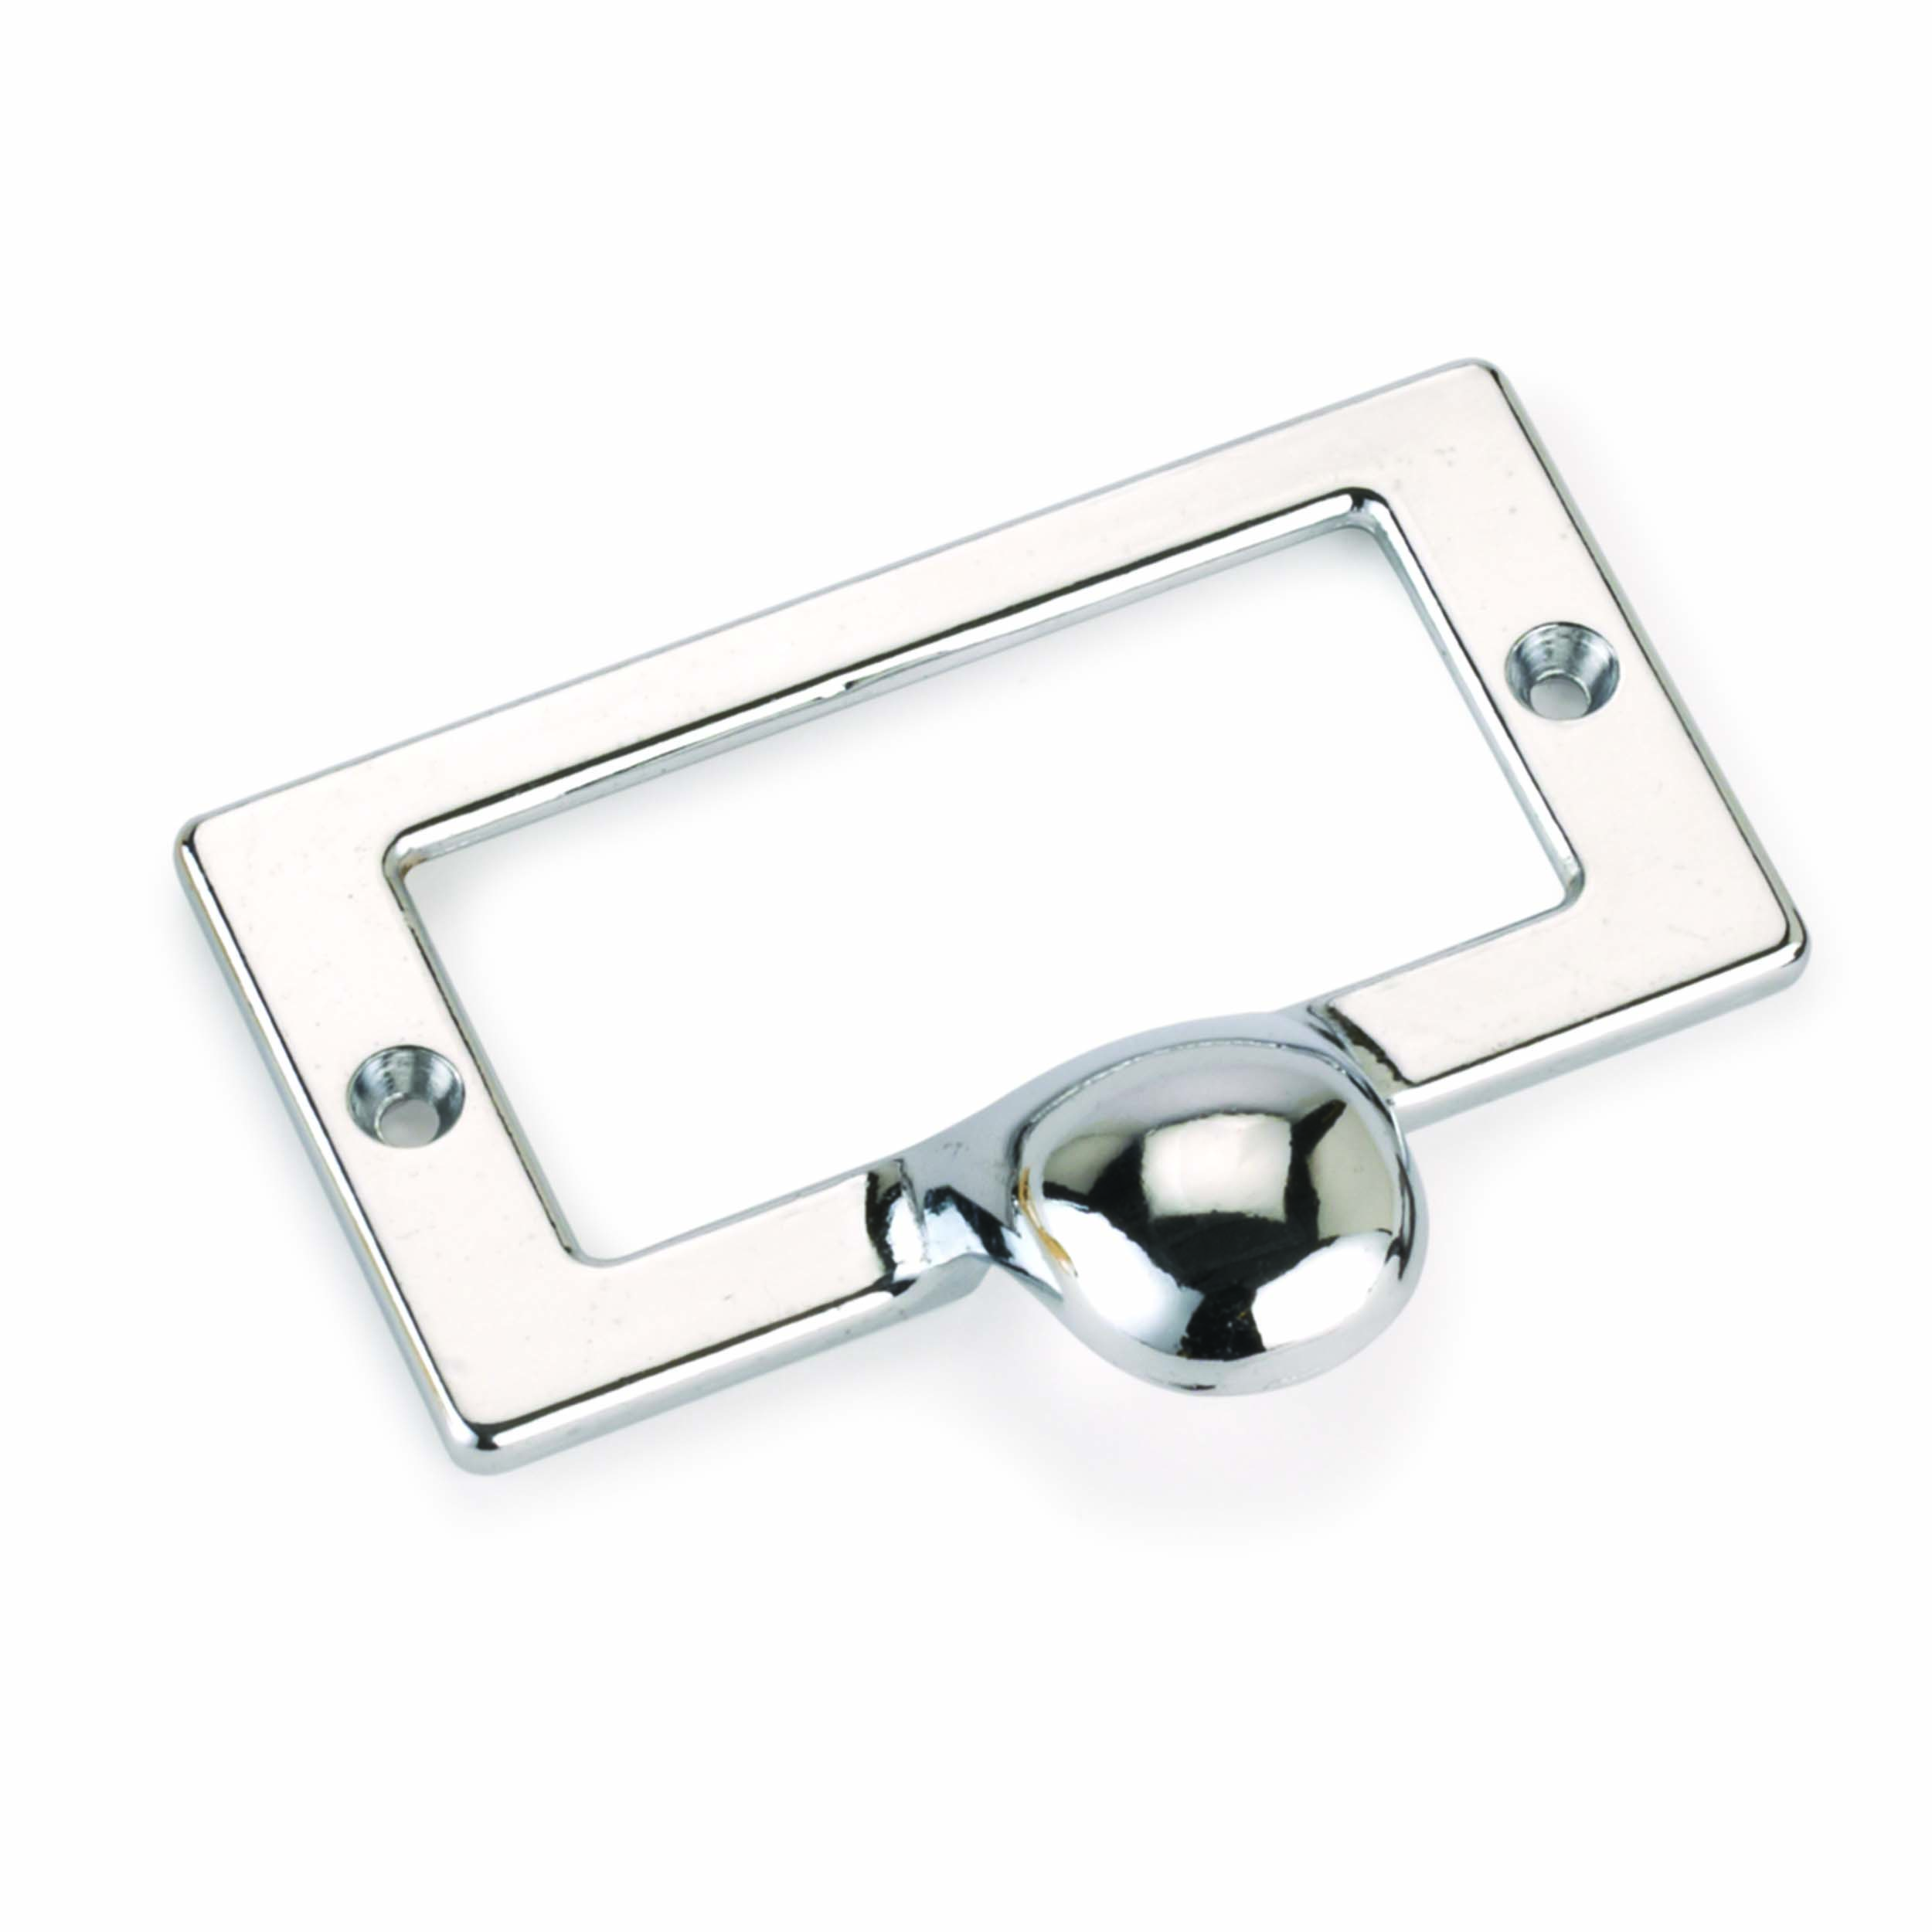 Drawer Pull With Card Holder, Chrome Finish